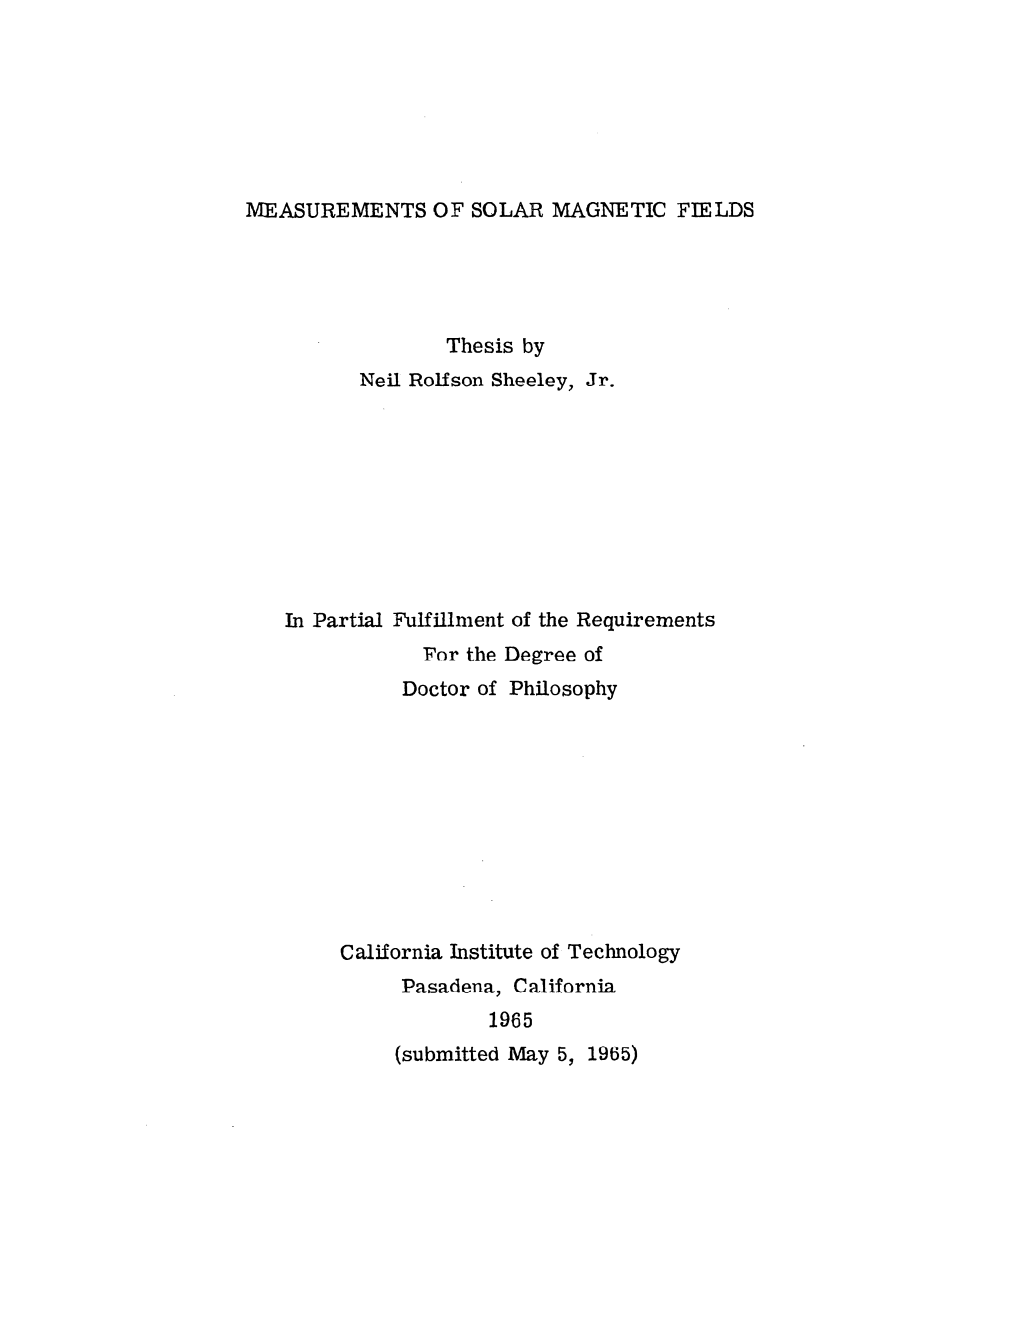 MEASUREMENTS of SOLAR MAGNETIC FIELDS Thesis by Neil